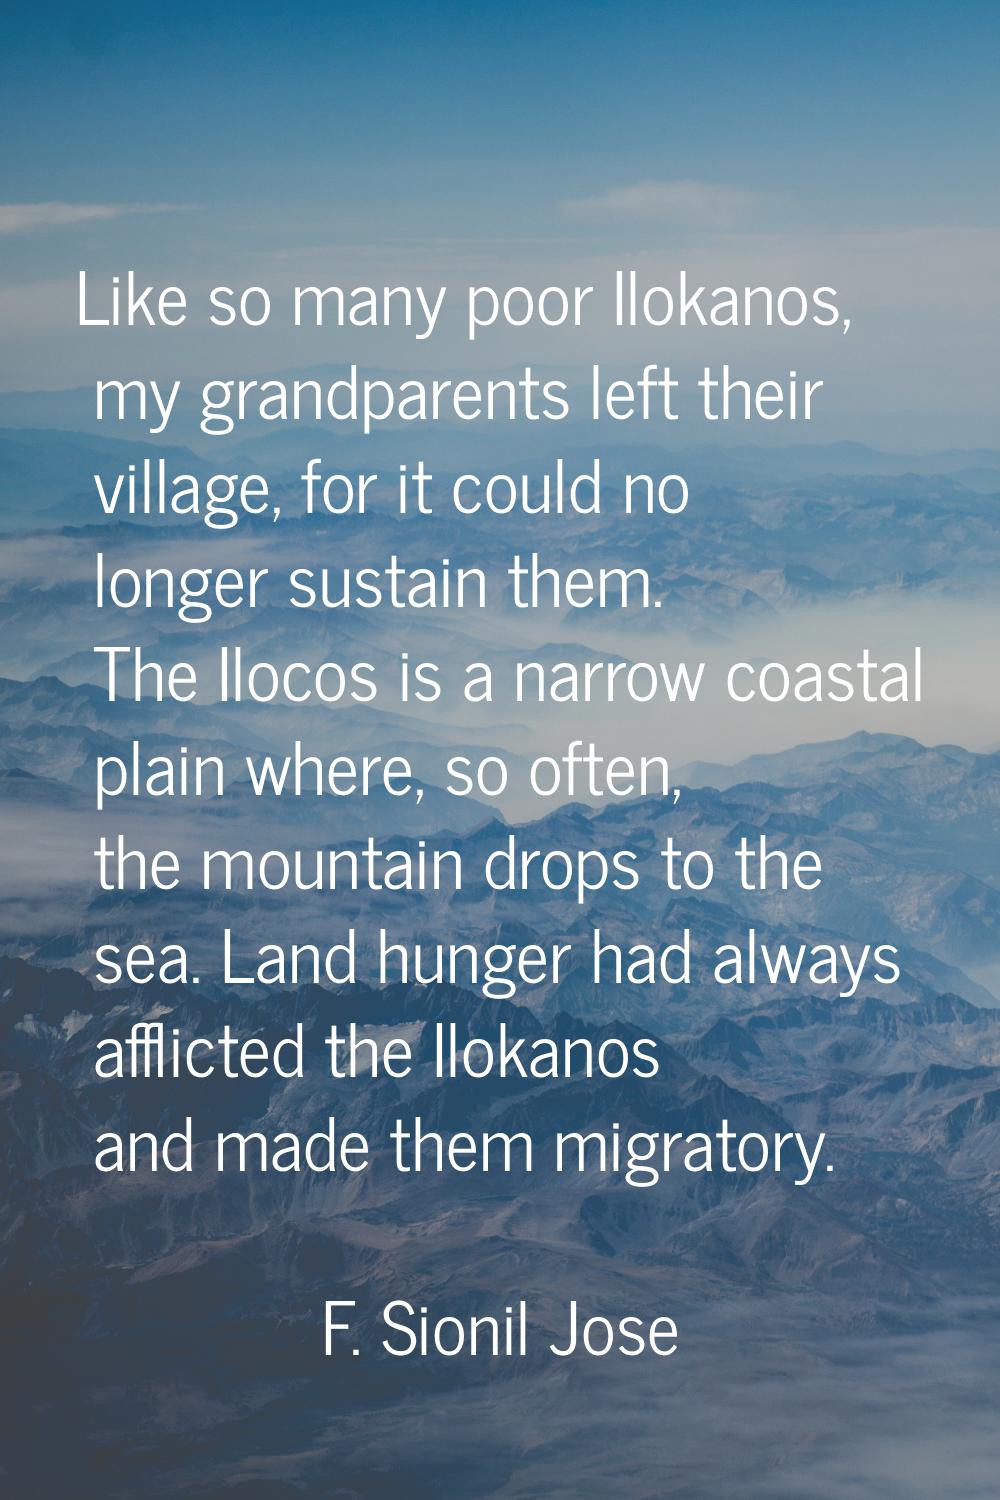 Like so many poor Ilokanos, my grandparents left their village, for it could no longer sustain them